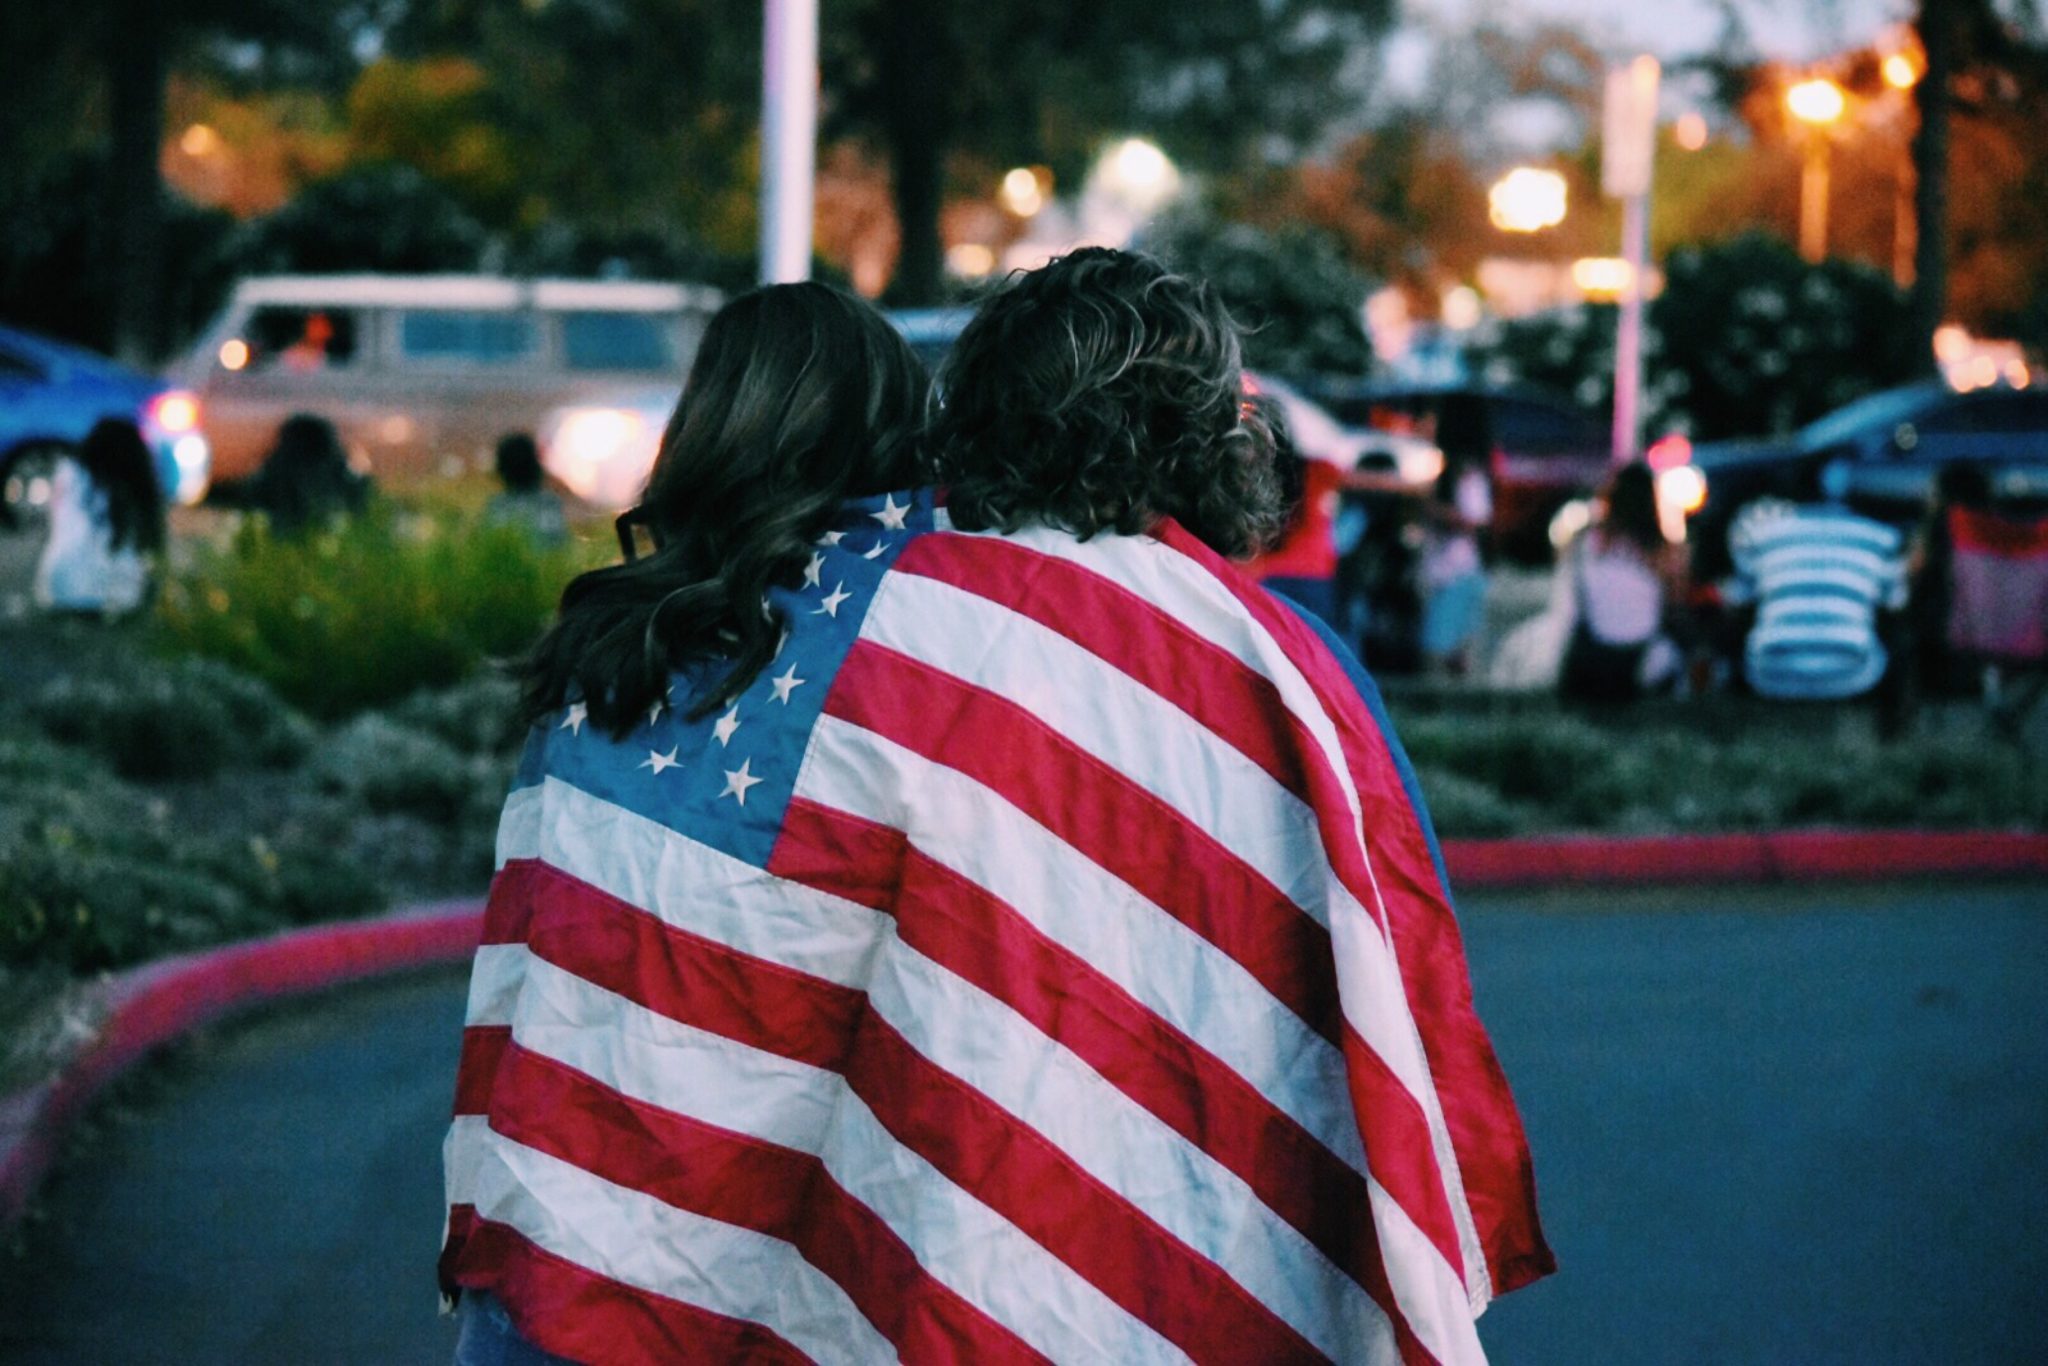 Two individuals walking with backs to camera, draped in American flag